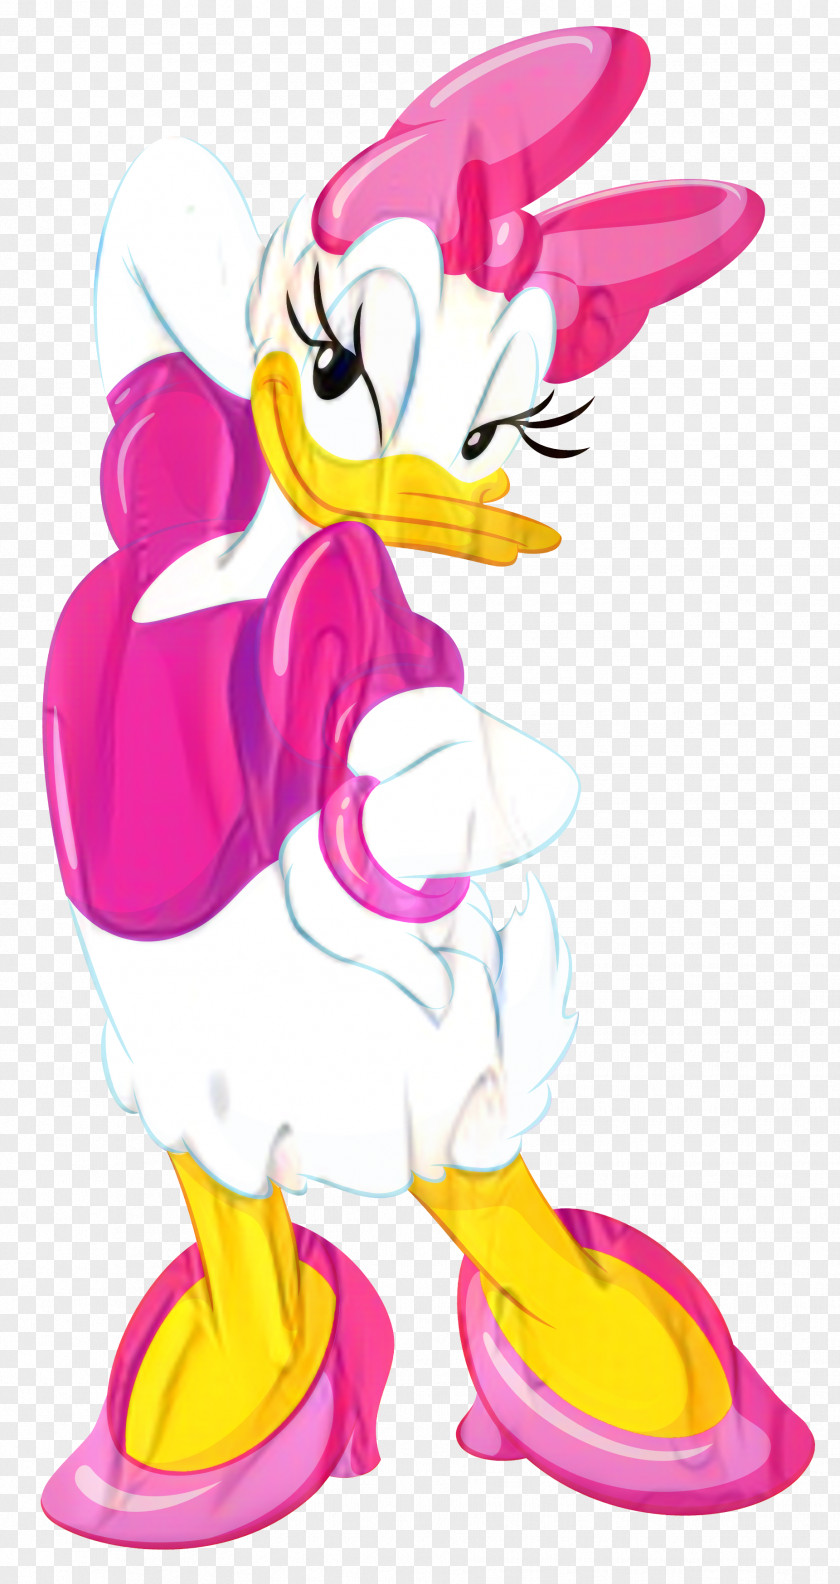 Daisy Duck Donald Pluto Minnie Mouse PNG